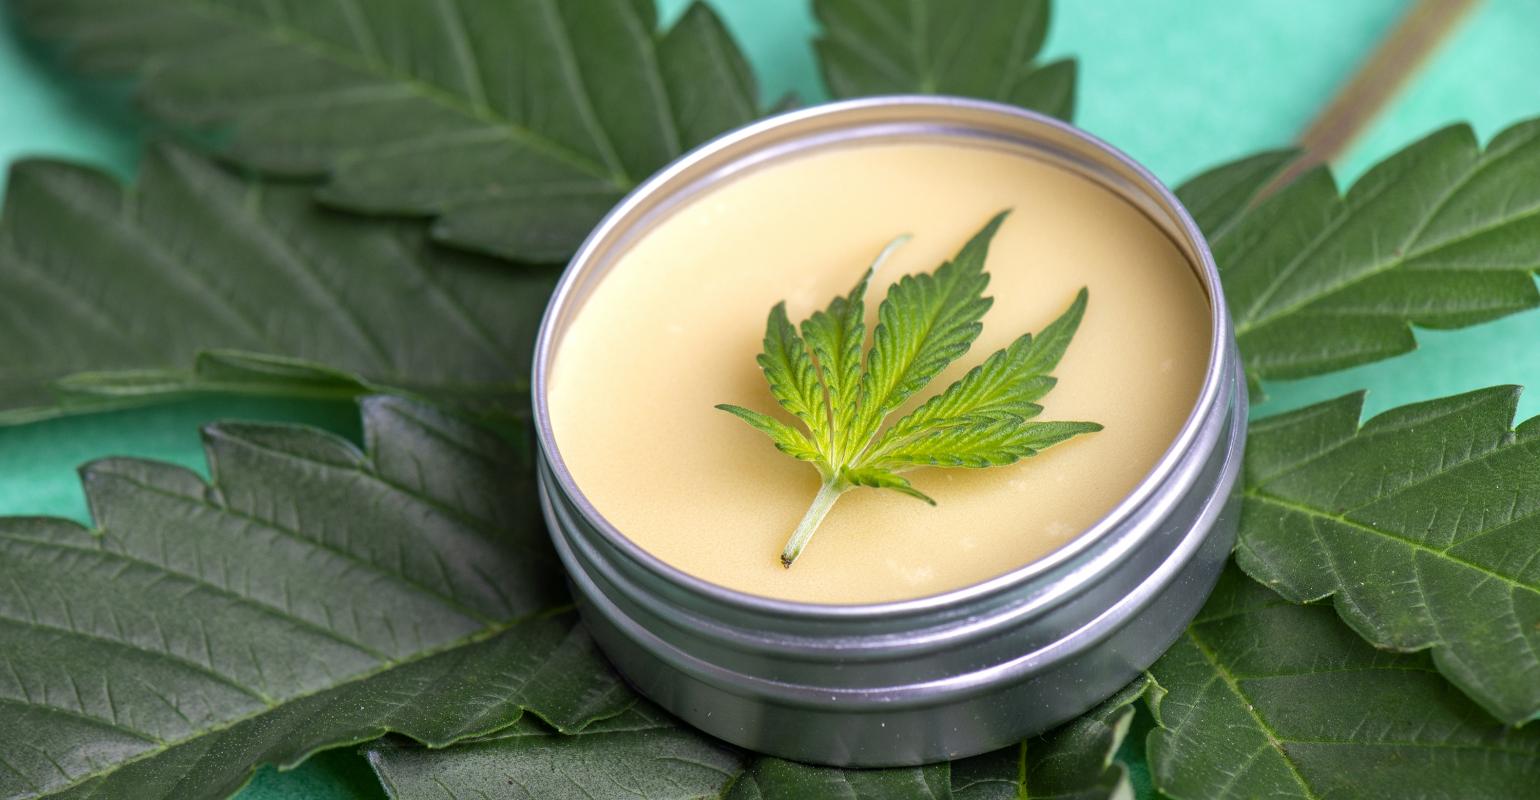 CBD products are growing among people at a faster rate and you can find so many CBD products these days including tinctures